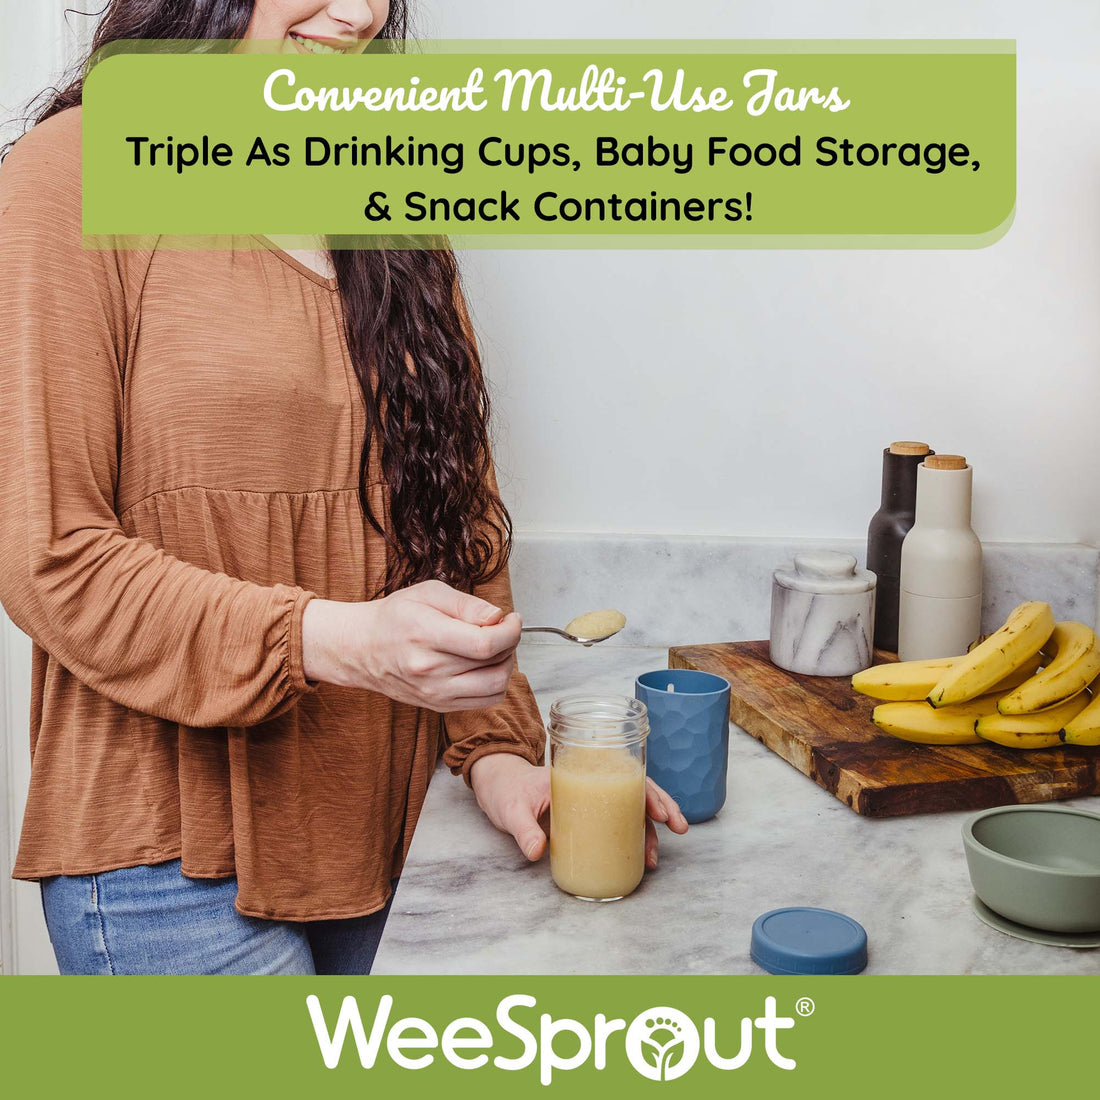 WeeSprout Snack Containers, Food Grade Silicone Cups, Spill-Proof